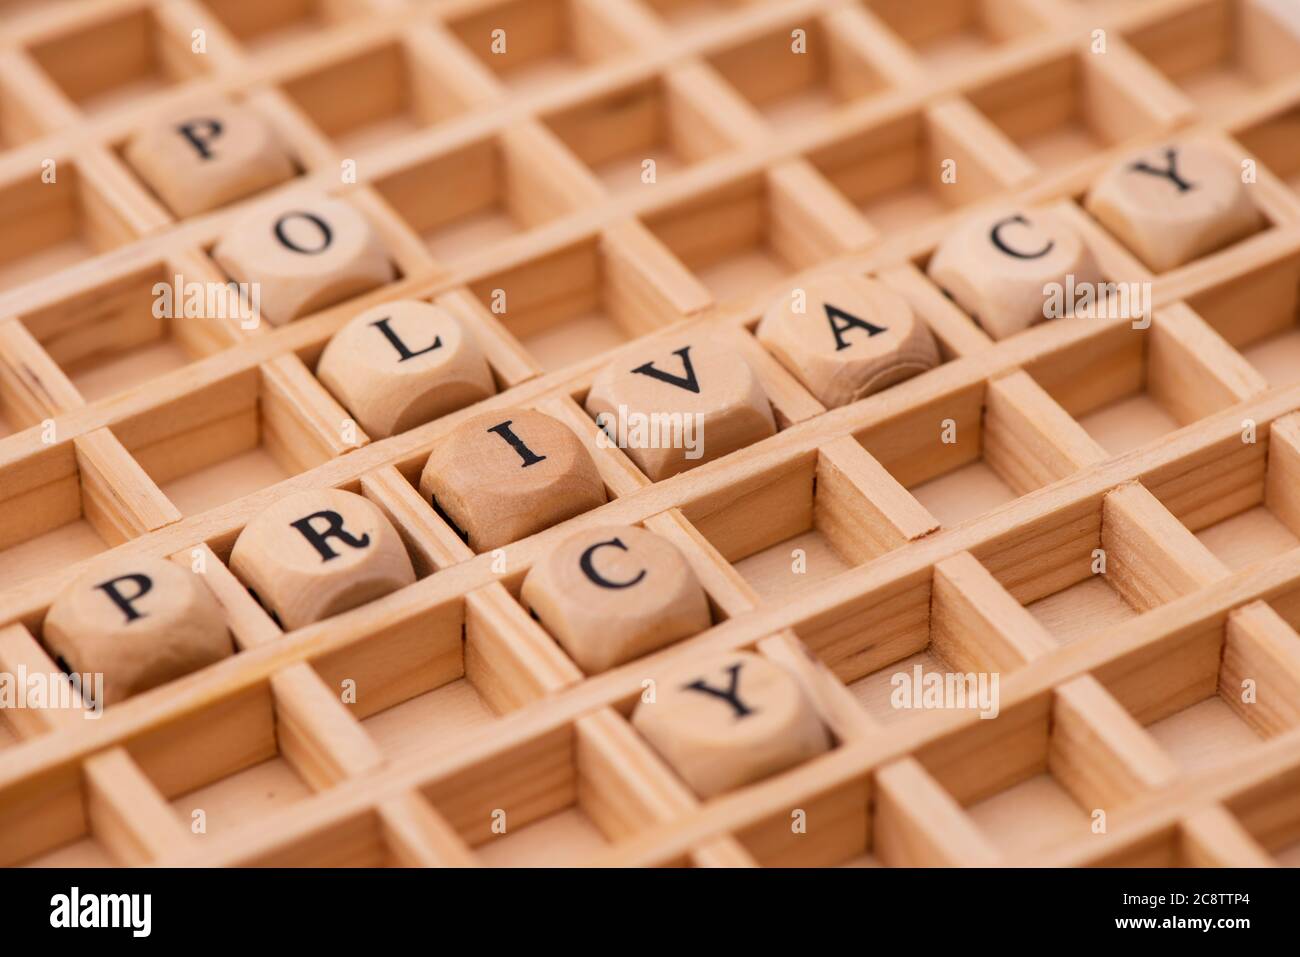 word cloud for privacy policy Stock Photo